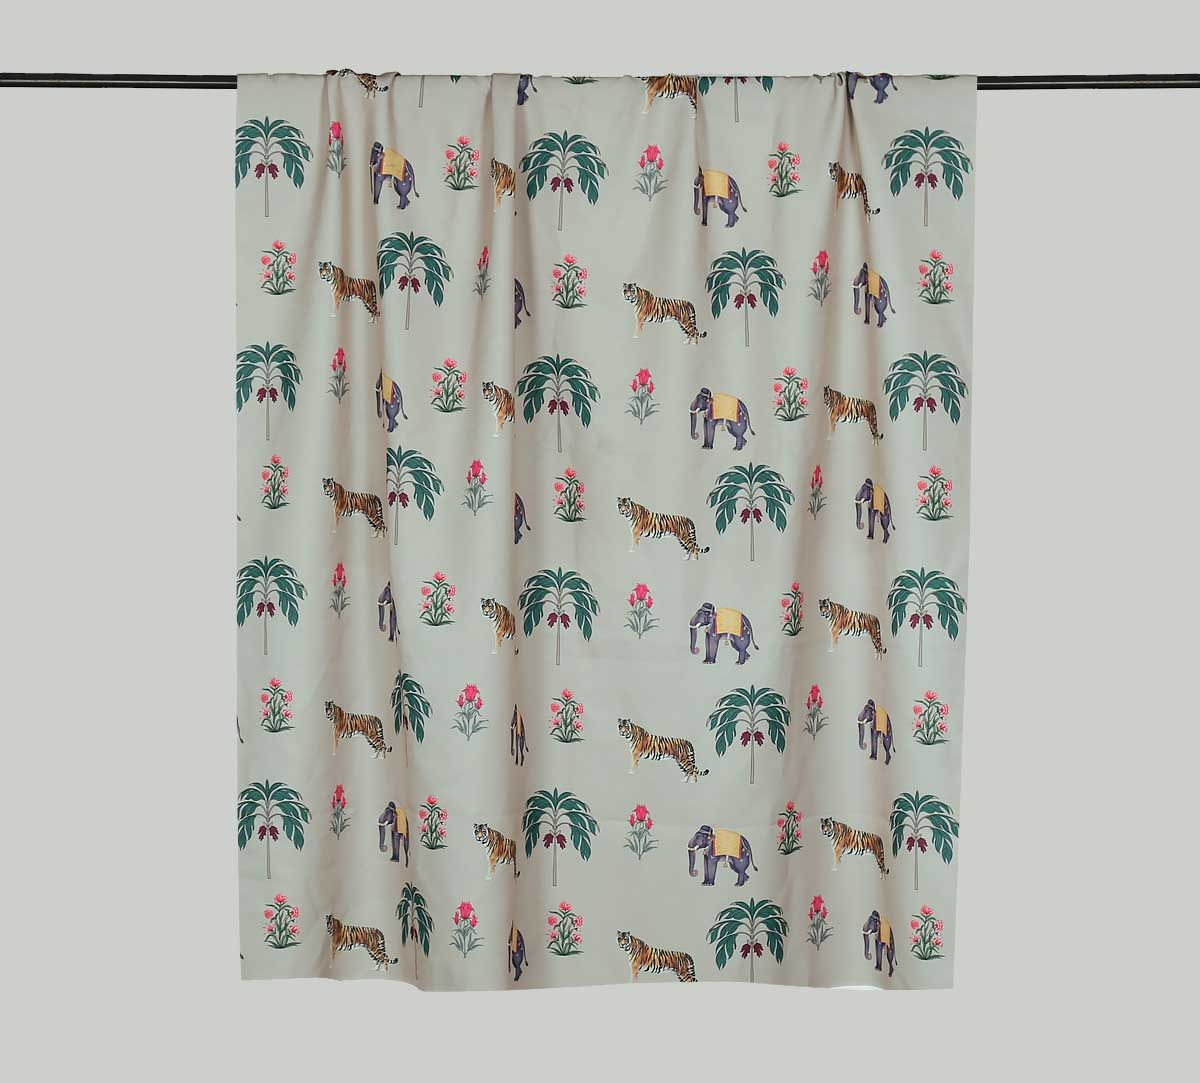 India Circus by Krsnaa Mehta Poetic Disposition Fabric